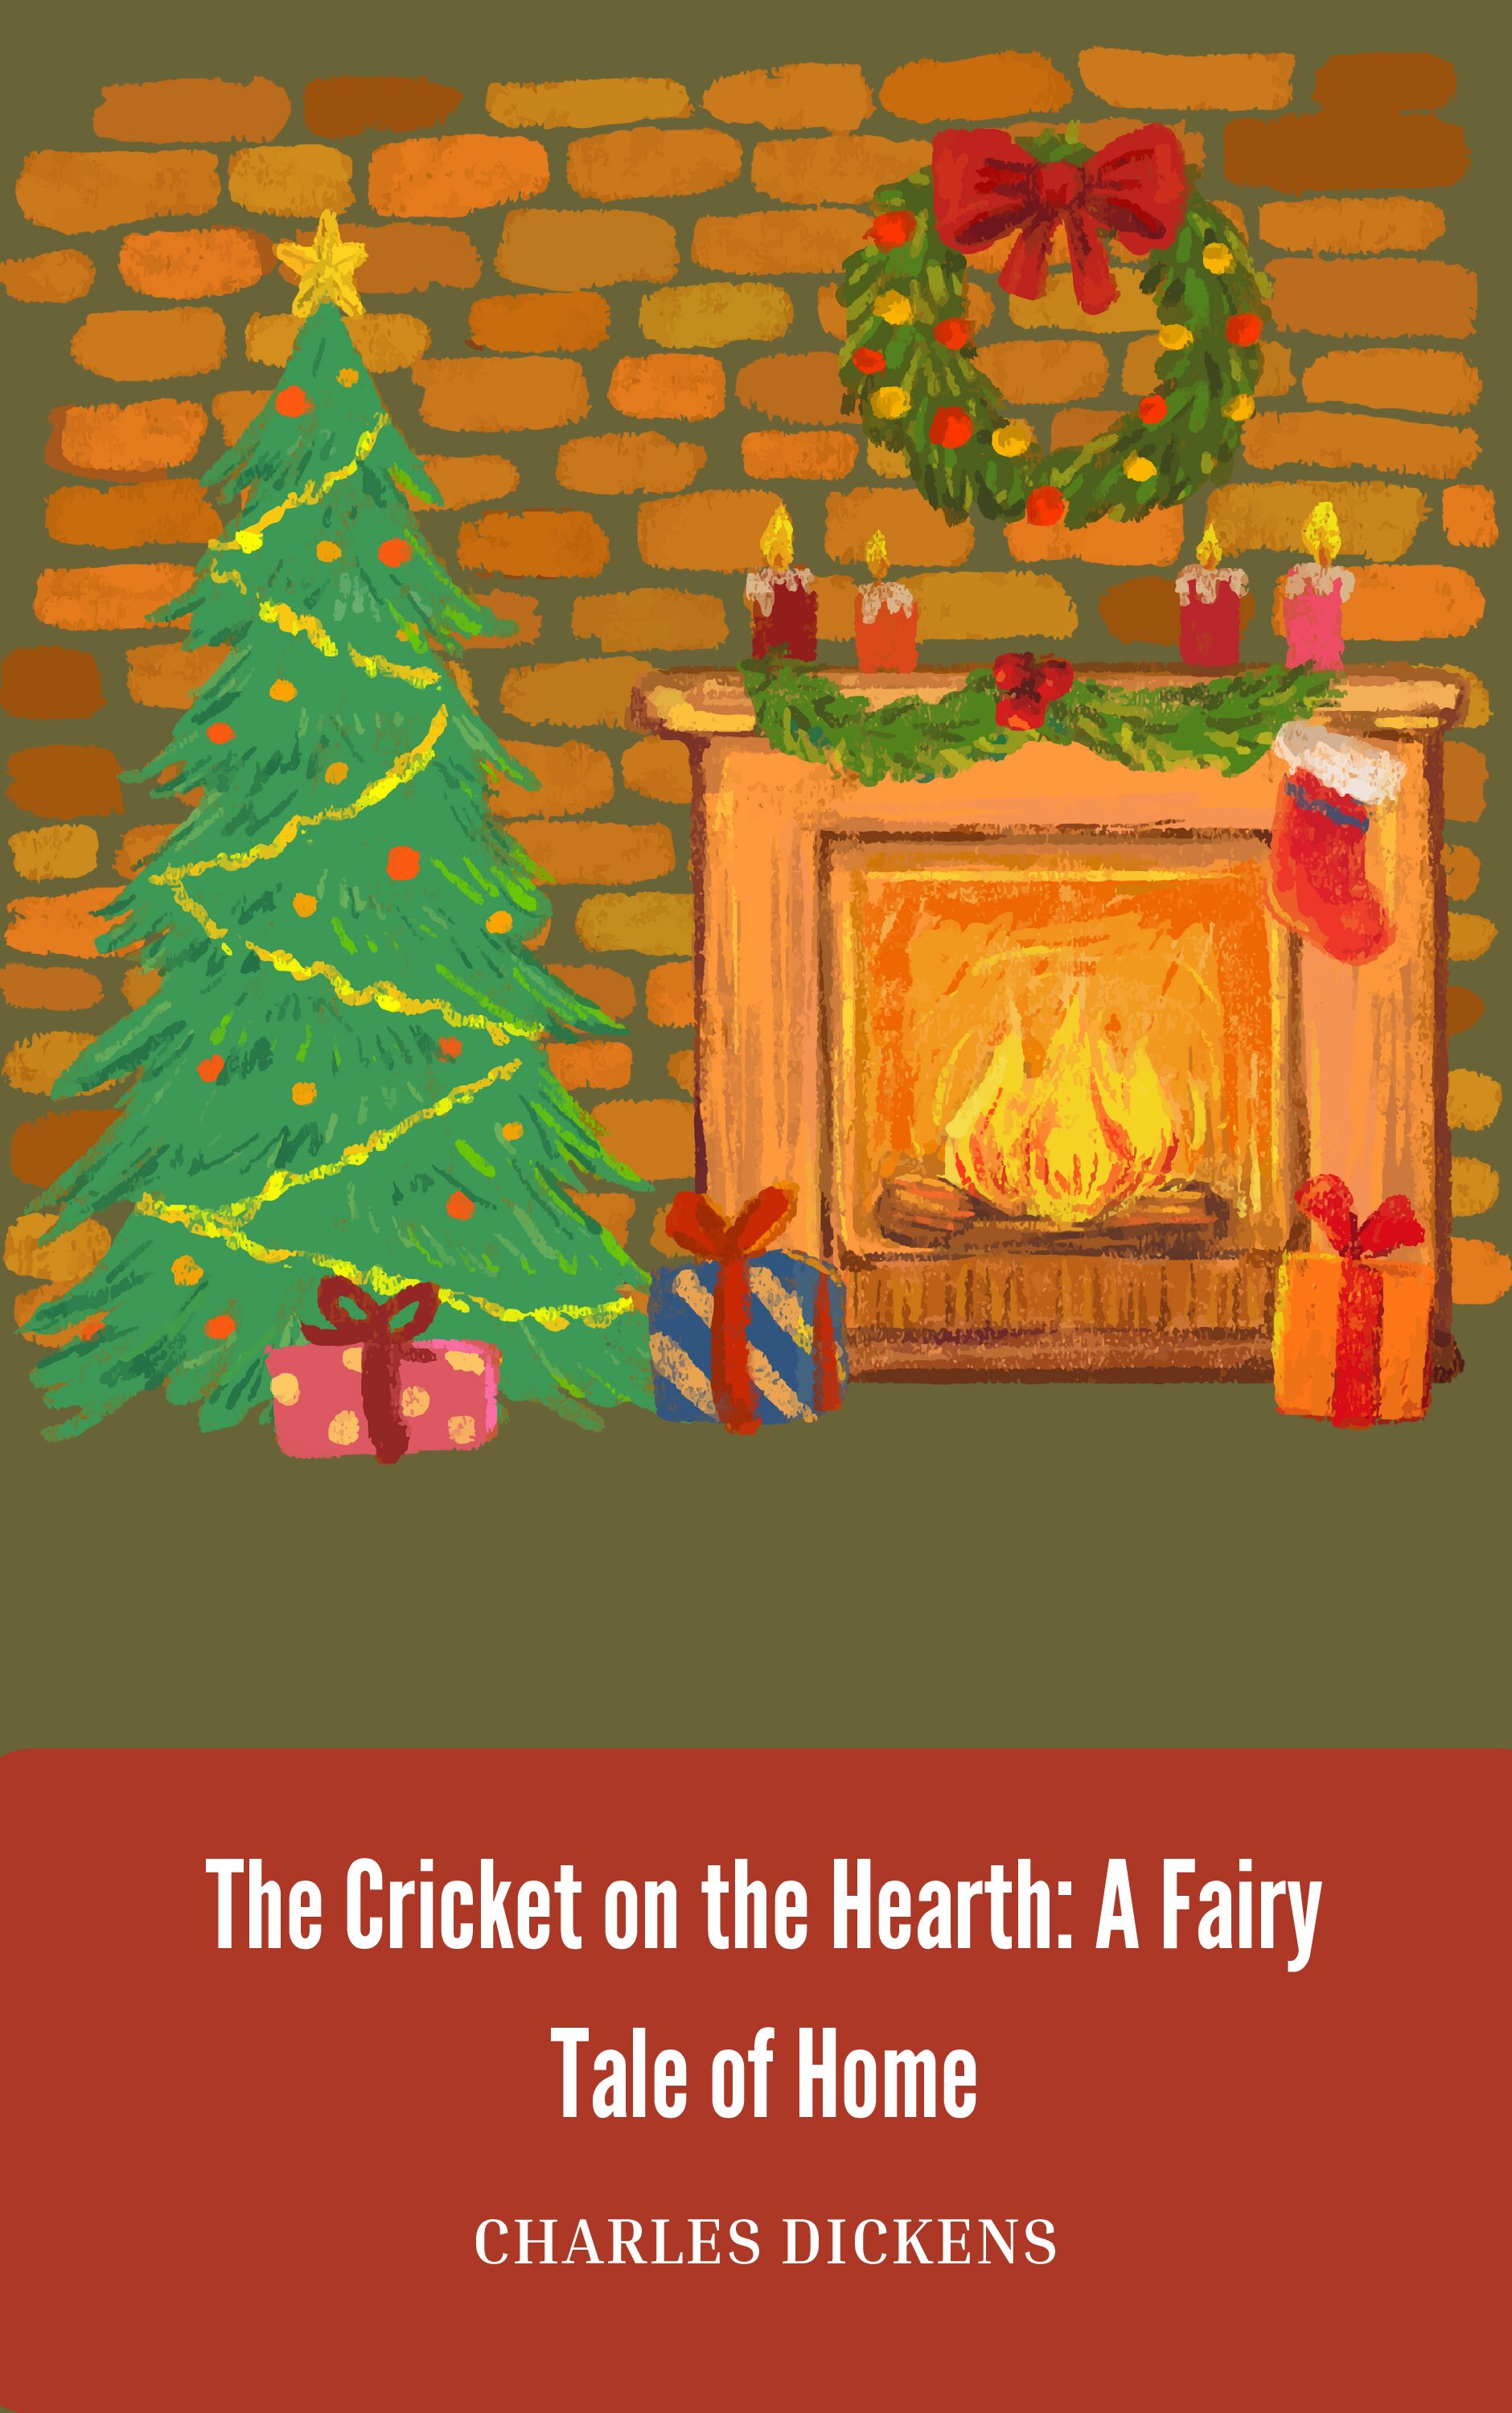 Book Cover: The Cricket on the Hearth- A Fairy Tale of Home